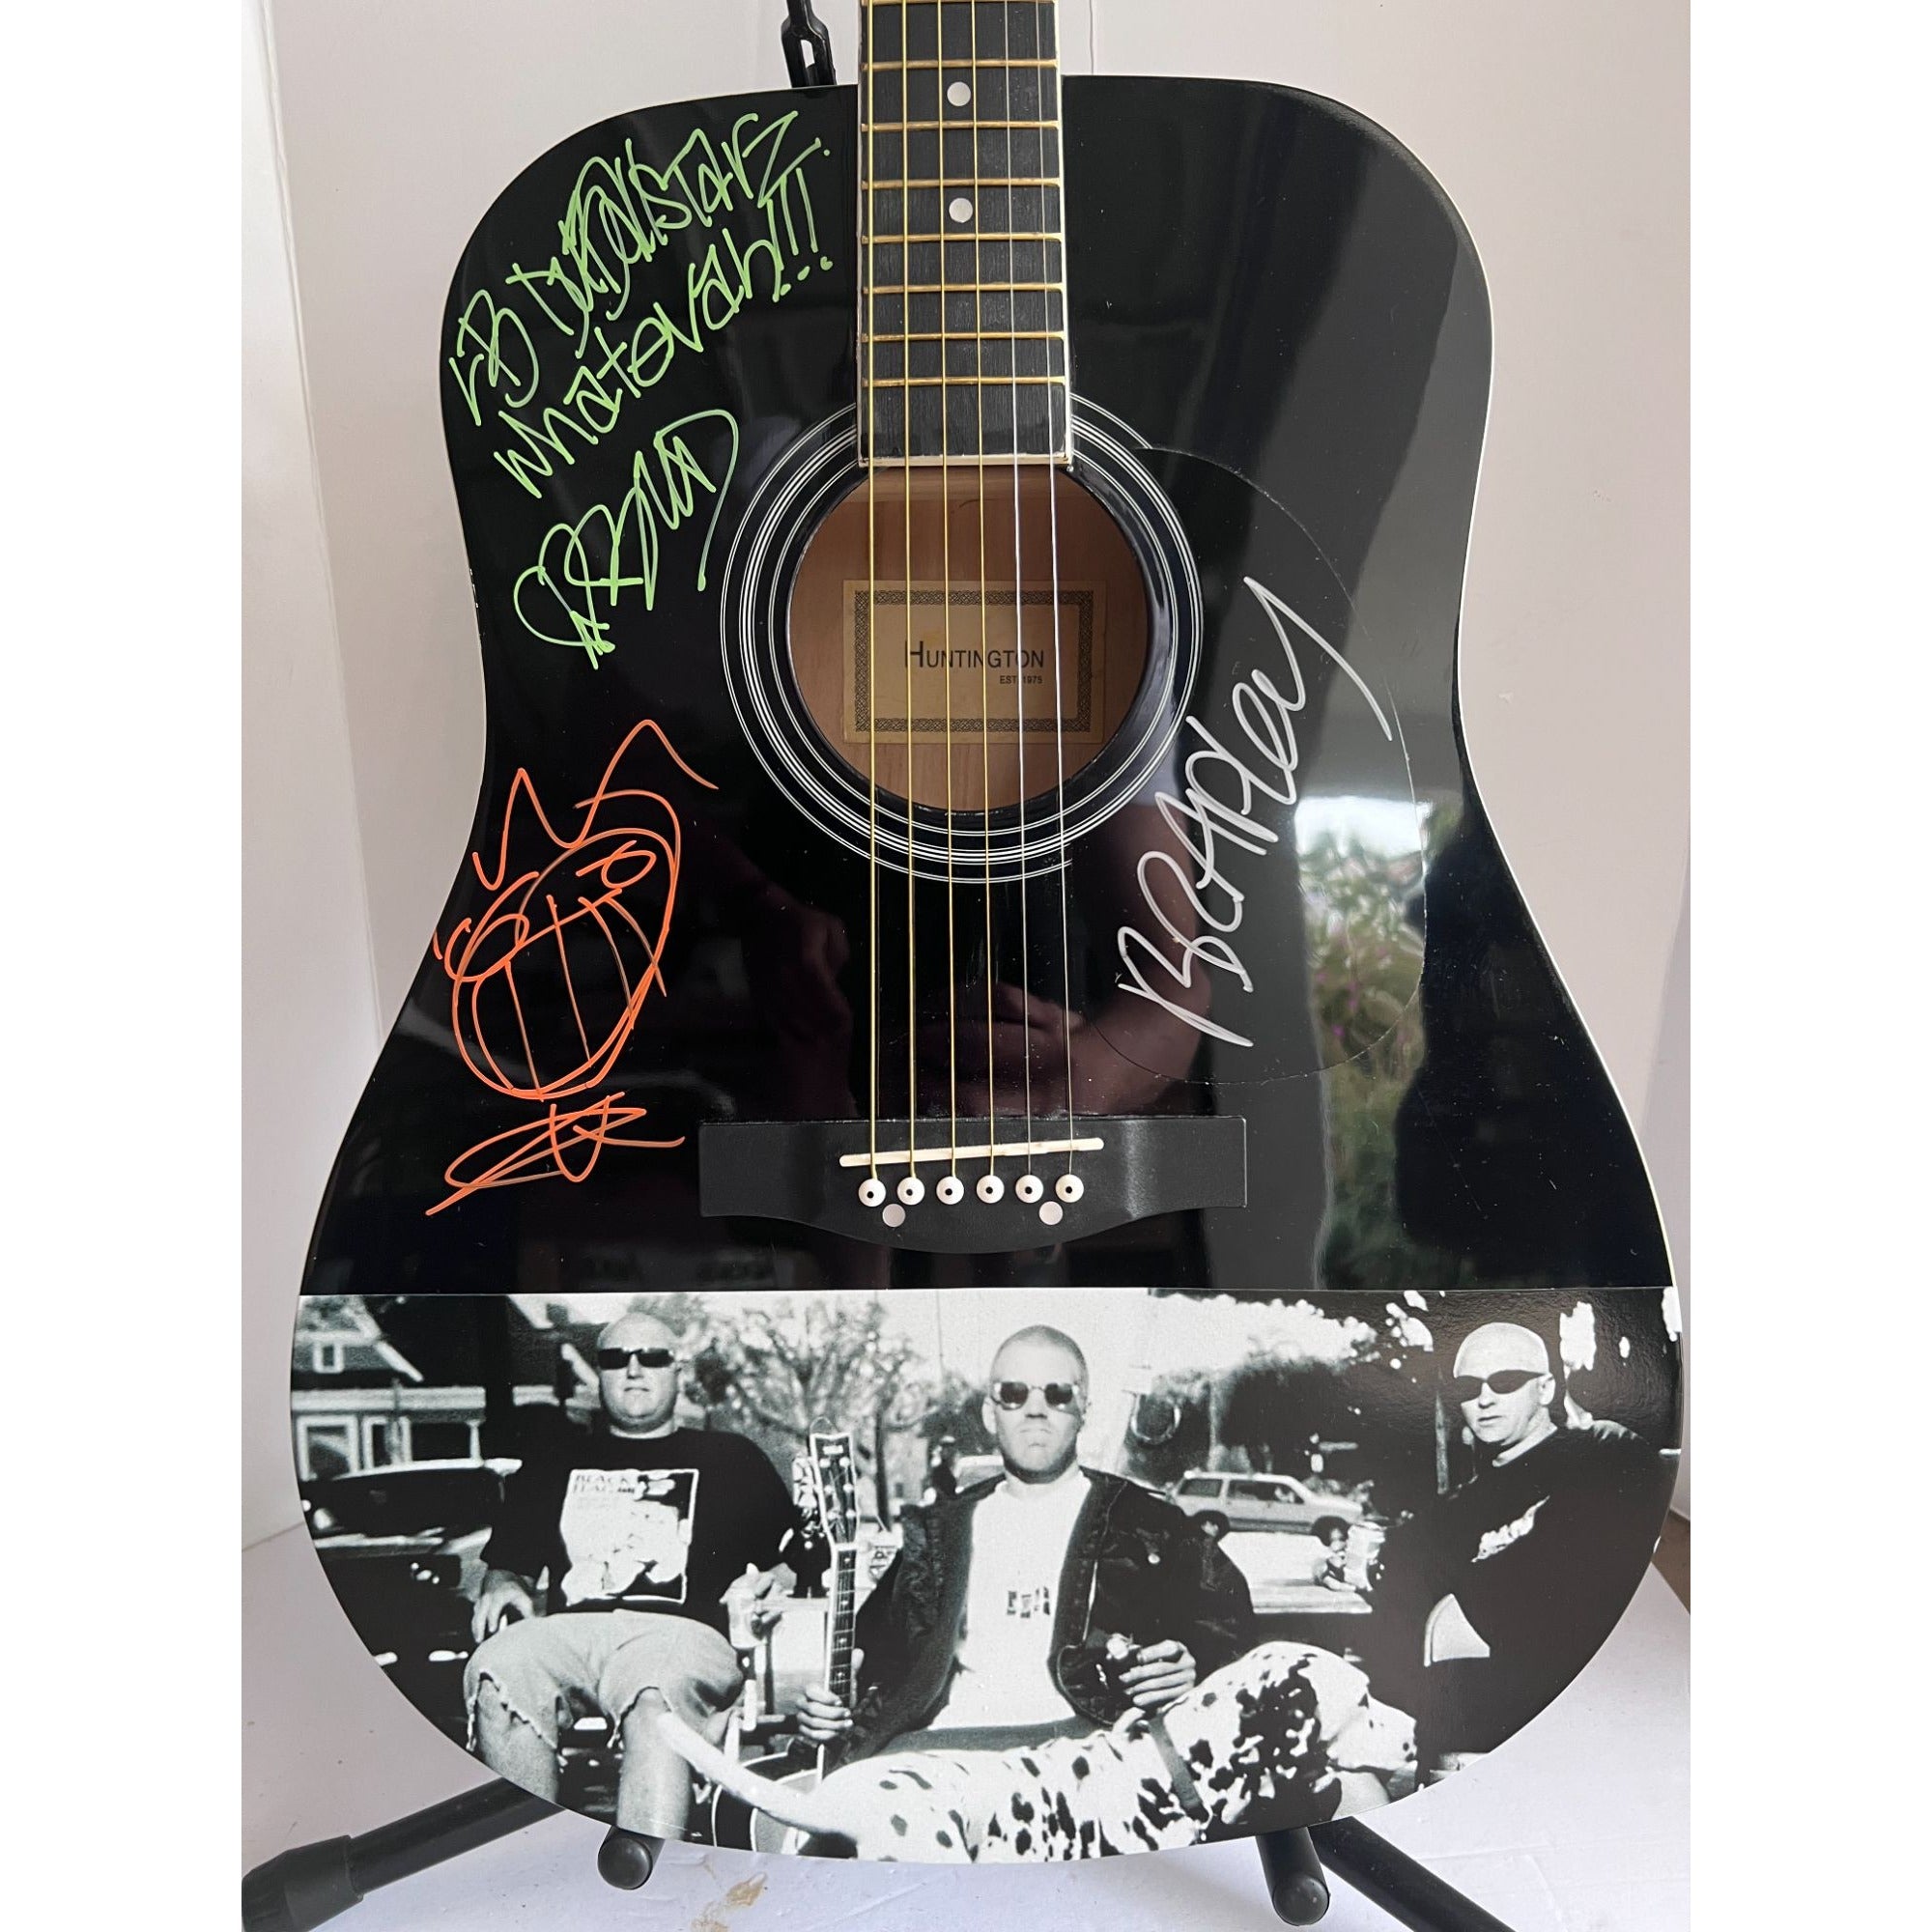 SUBLIME Bradley Nowell, Eric Wilson, Bud Gaugh" One of A kind 39' inch full size acoustic guitar signed